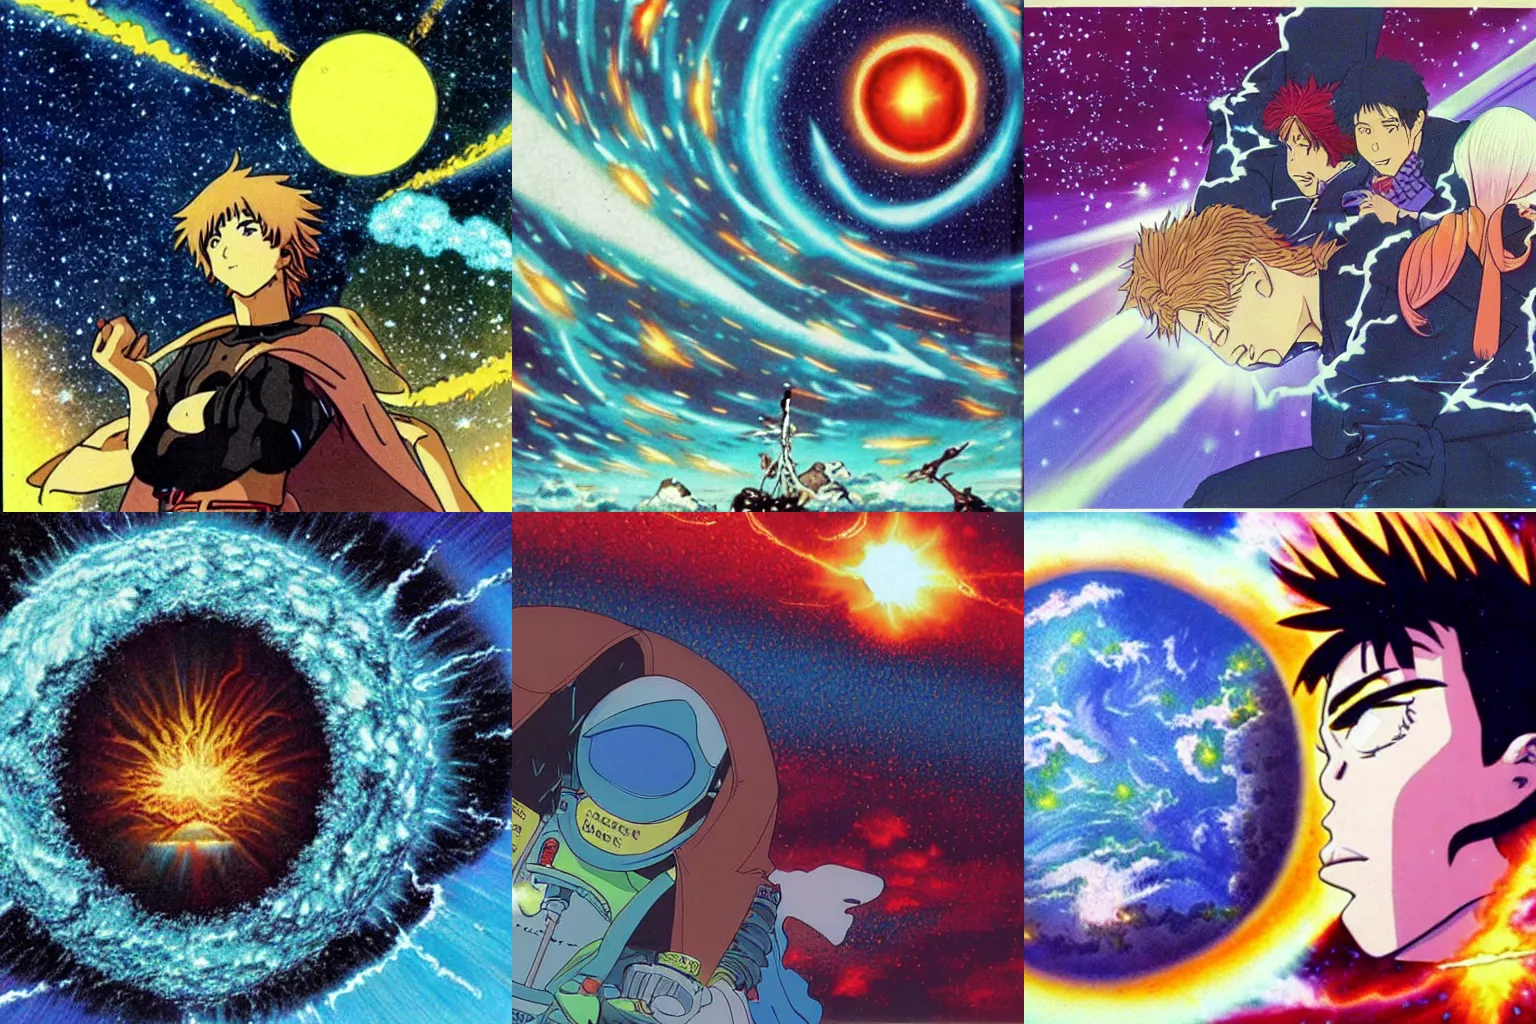 Prompt: The earth explodes into a supernova, Anime, 80s, astonishingly detailed